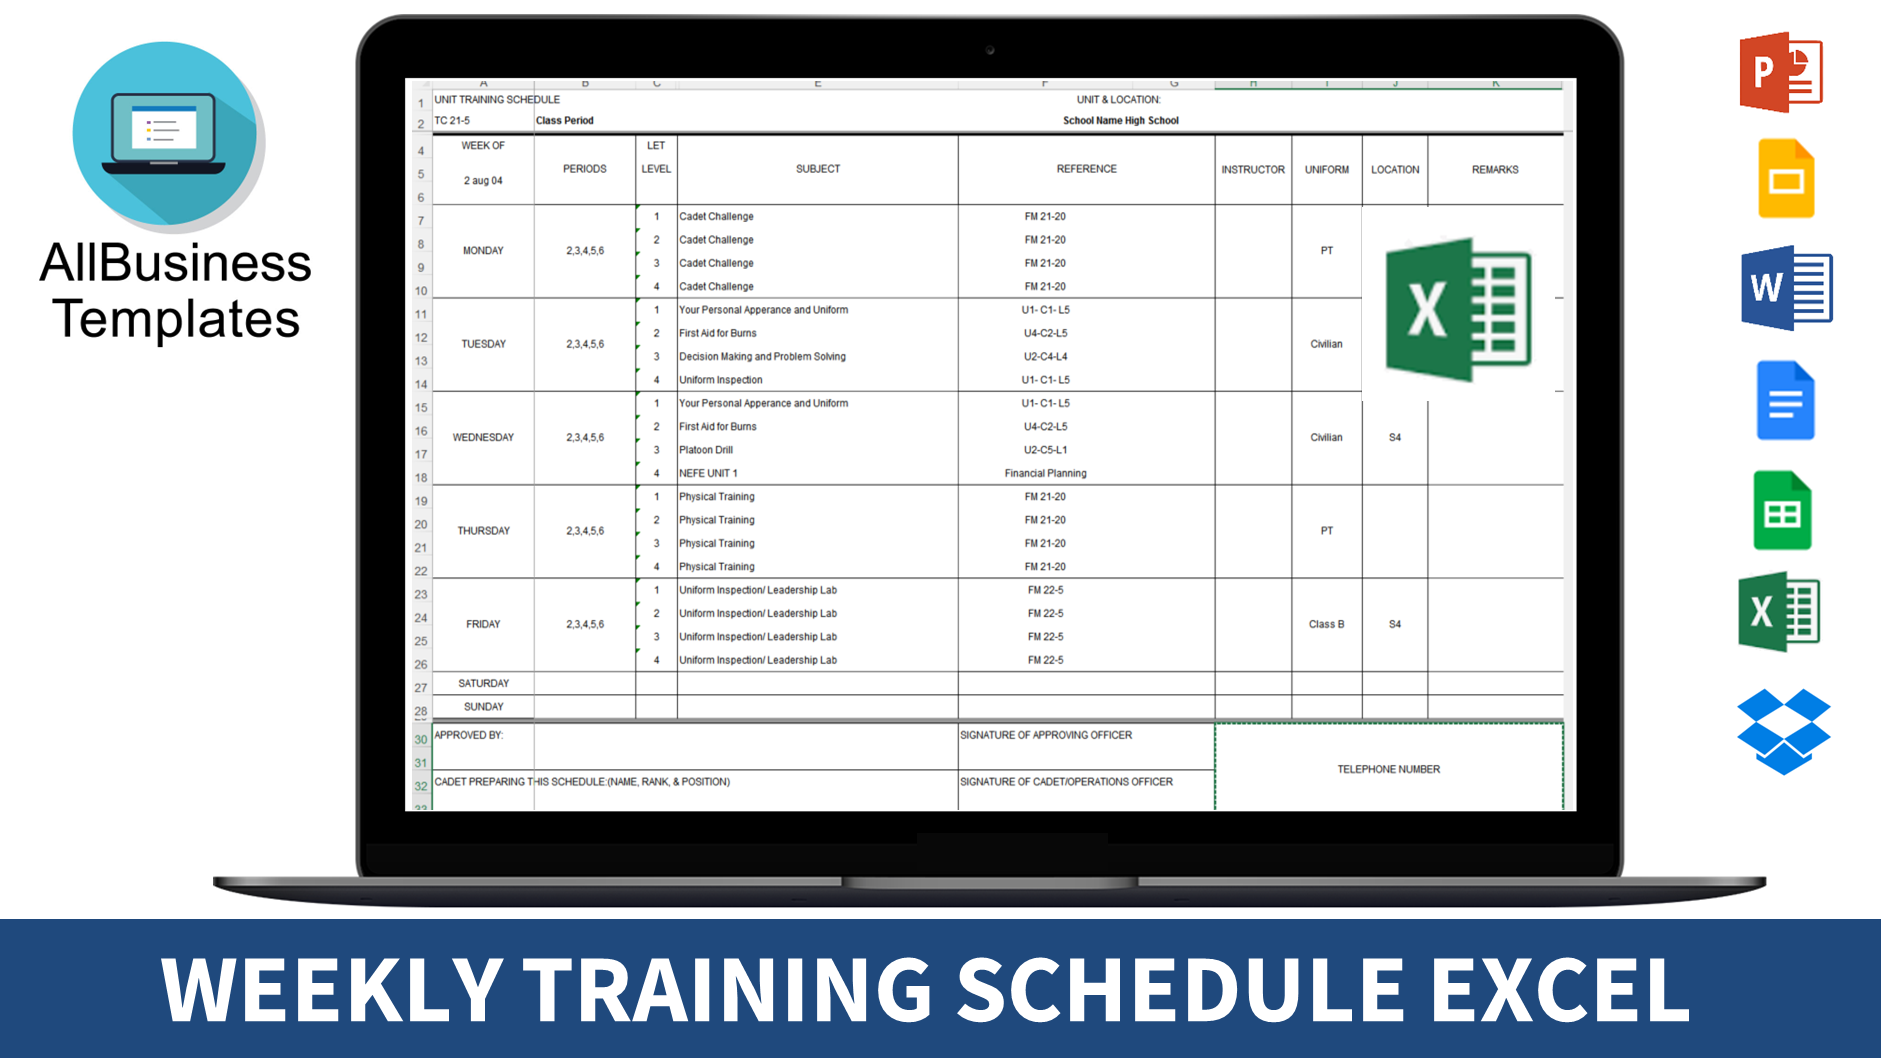 Weekly Training Schedule Excel main image